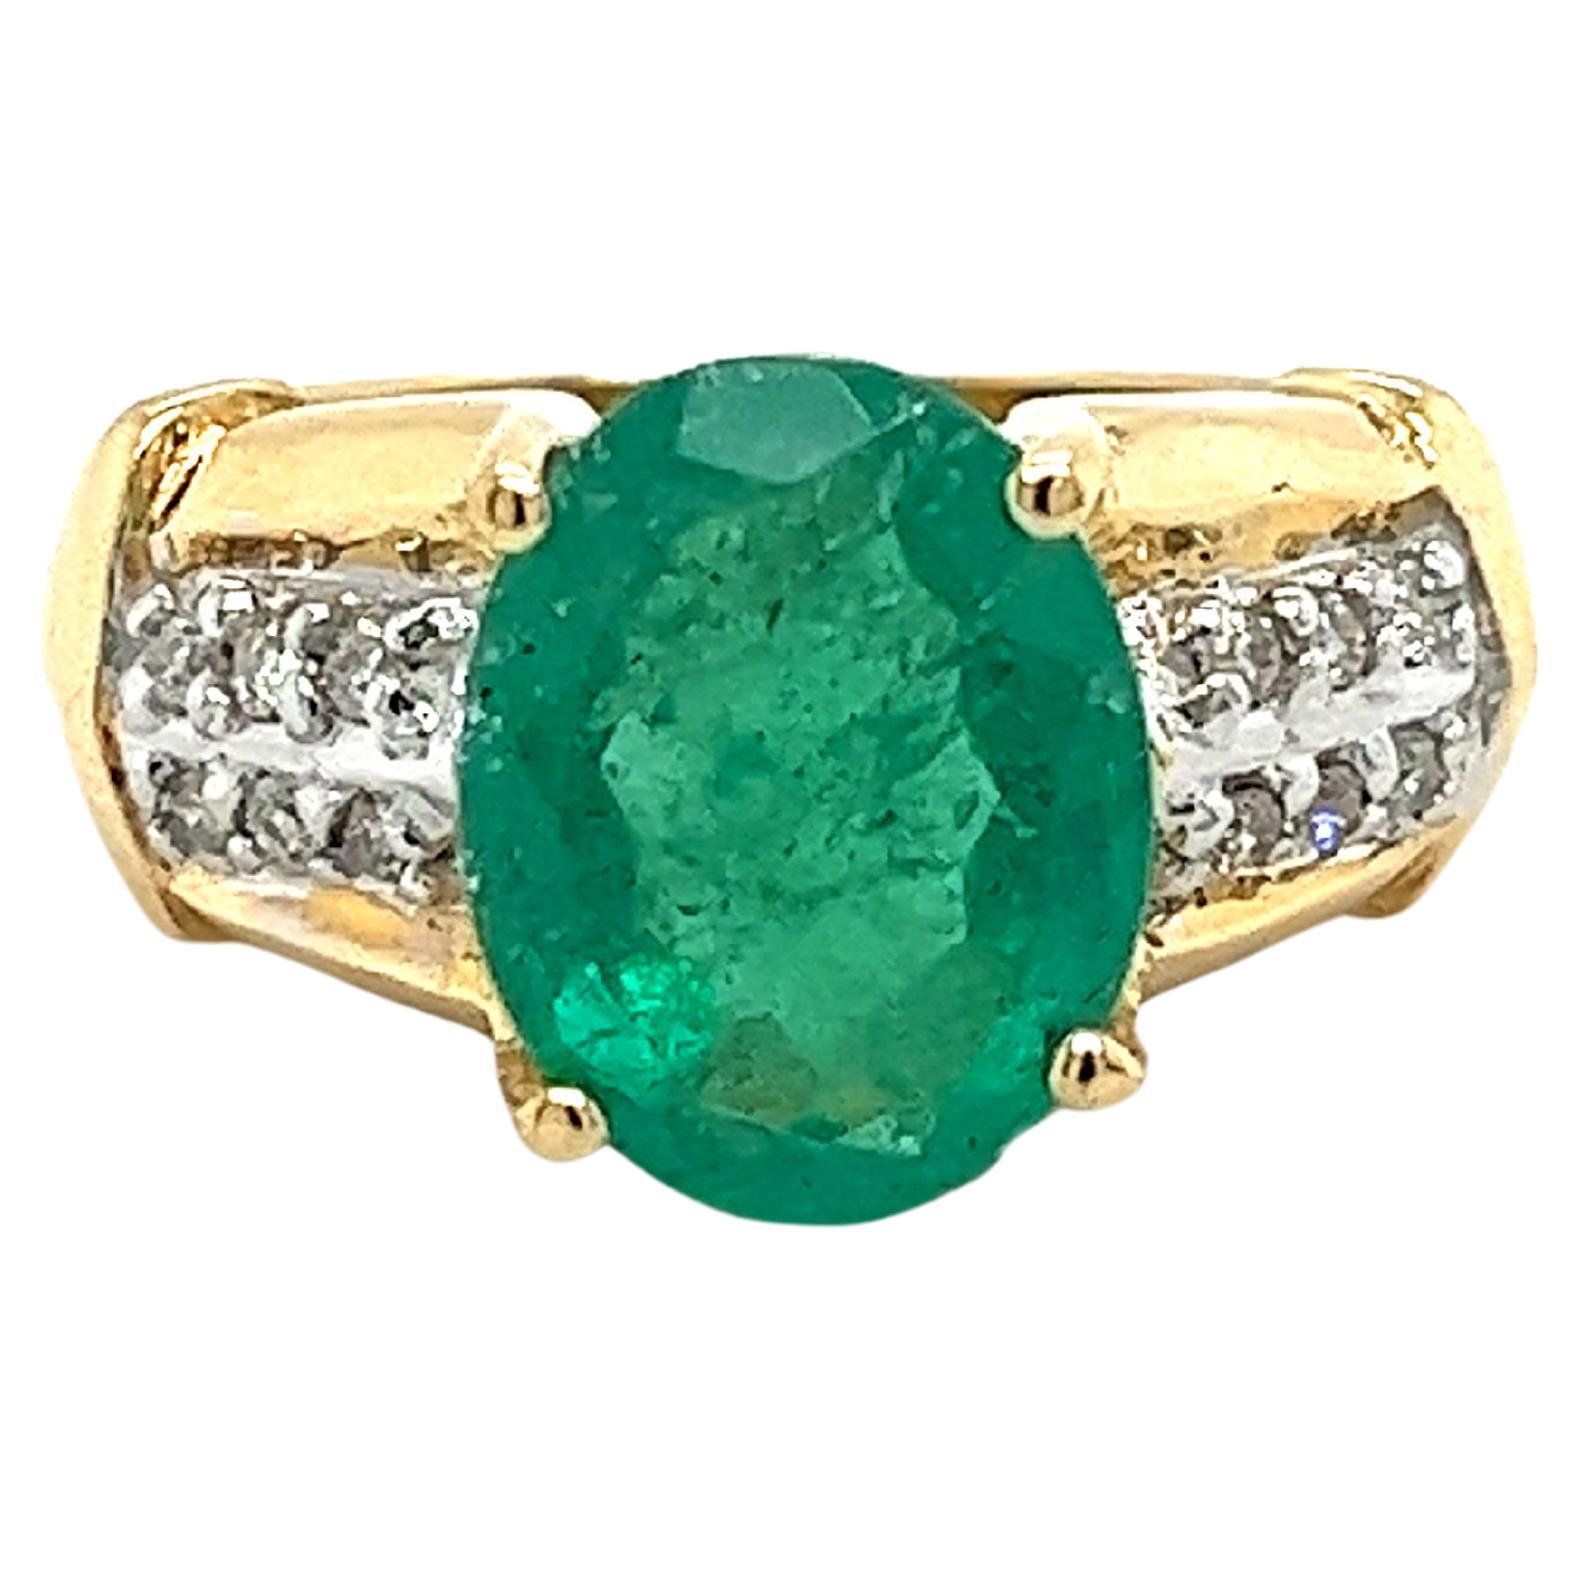 4.14 Carat Oval Cut Natural Emerald and Diamond Ring in 18K Yellow Gold